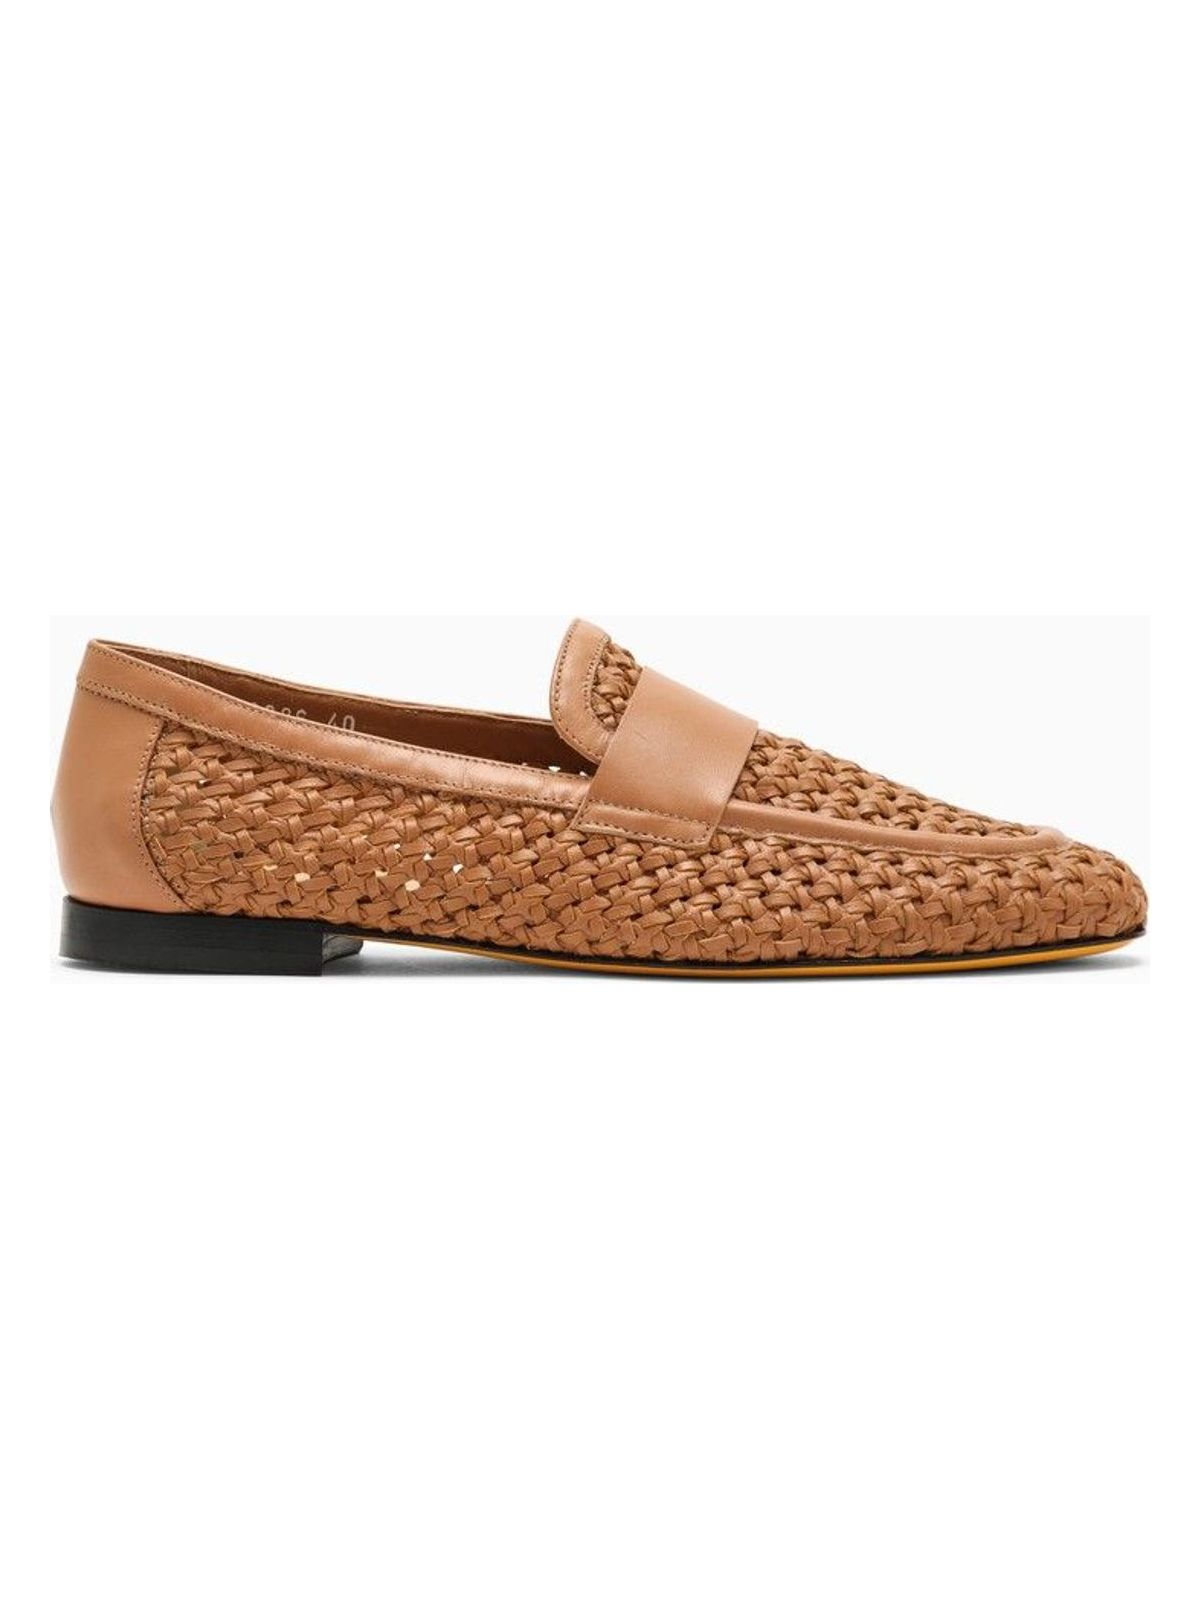 NC06 DOUCAL'S  WALNUT-COLOURED WOVEN LEATHER MOCCASIN